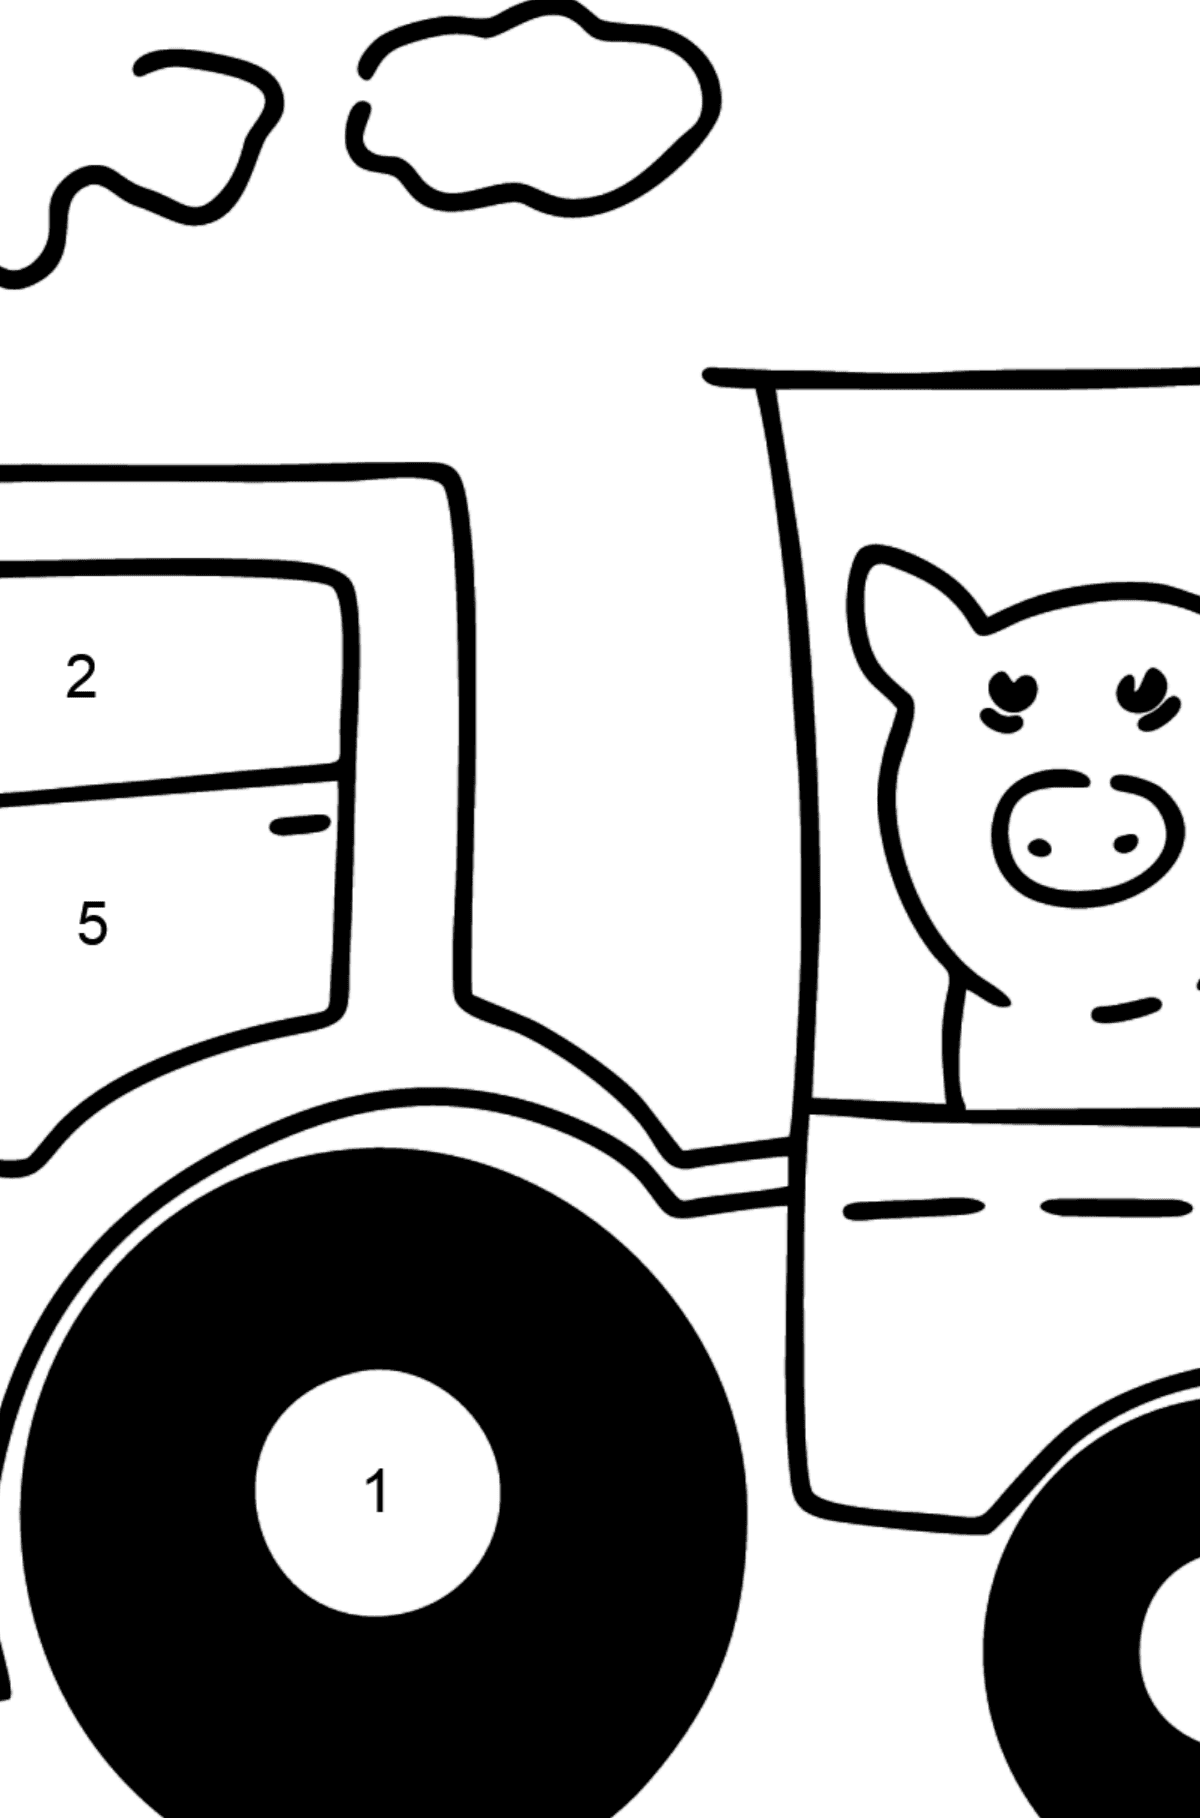 Tractor with Trailer coloring page - Coloring by Numbers for Kids